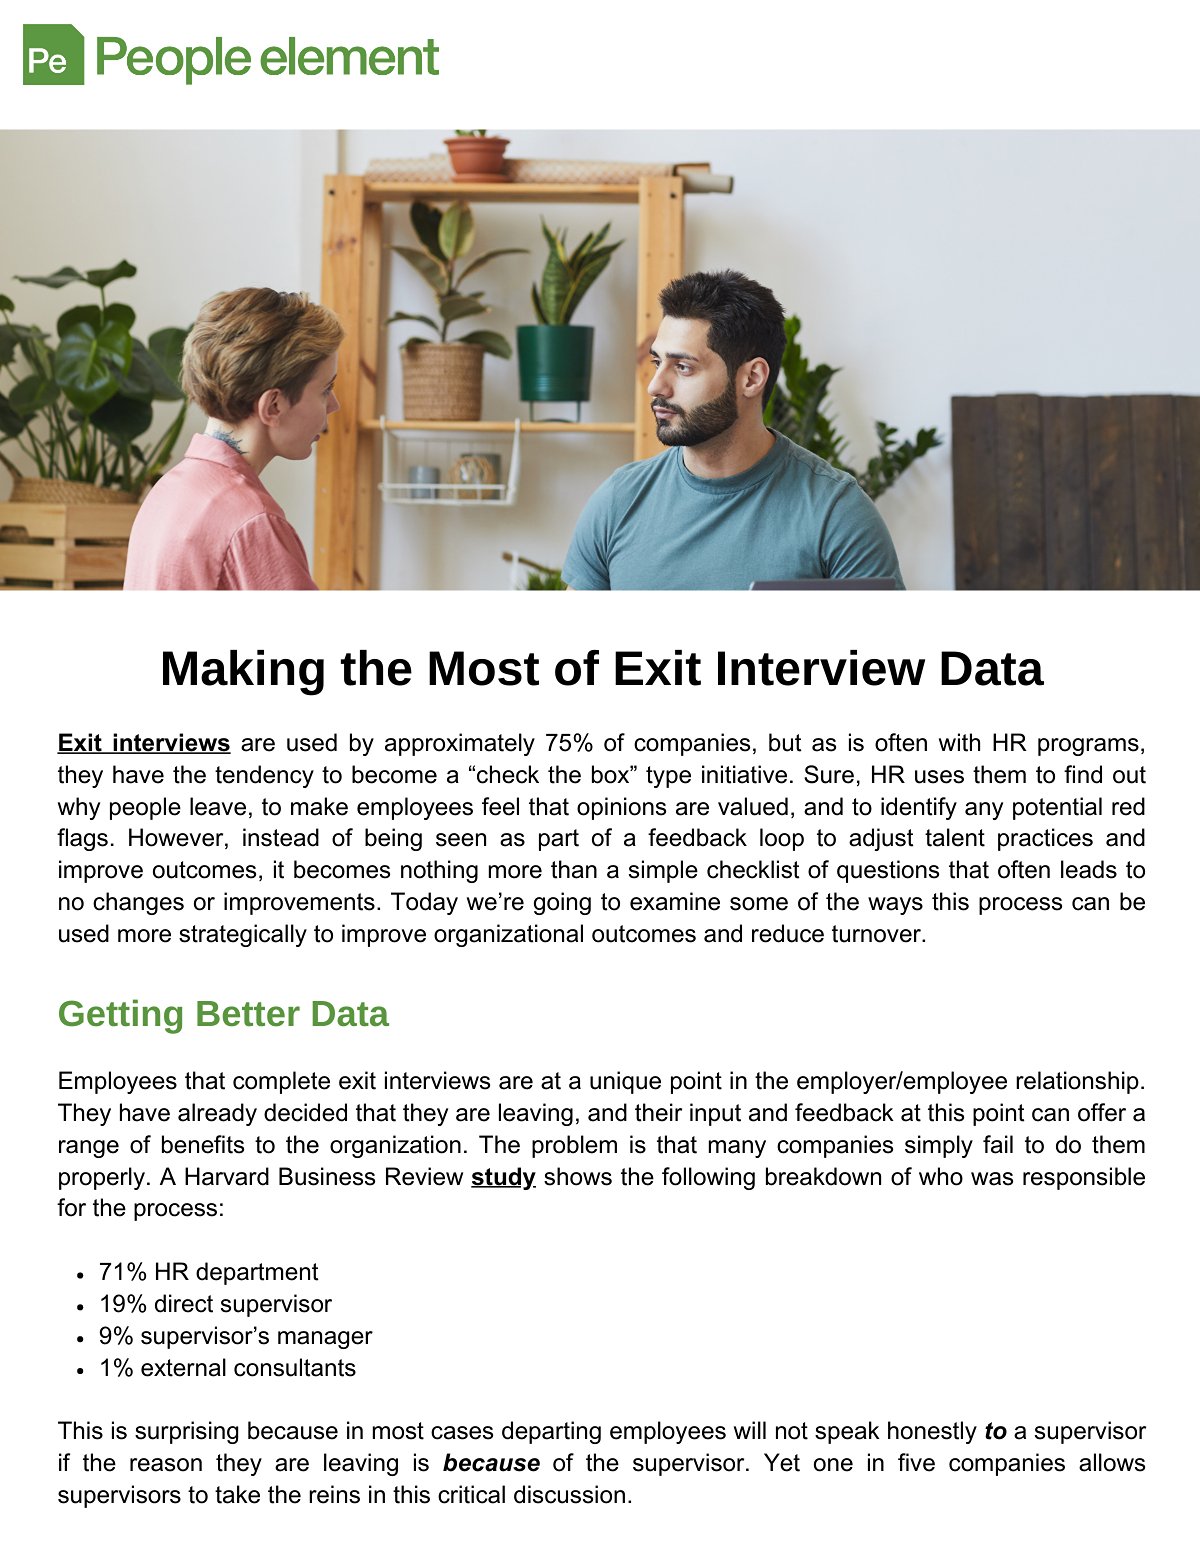 Making the Most of Exit Interview Data